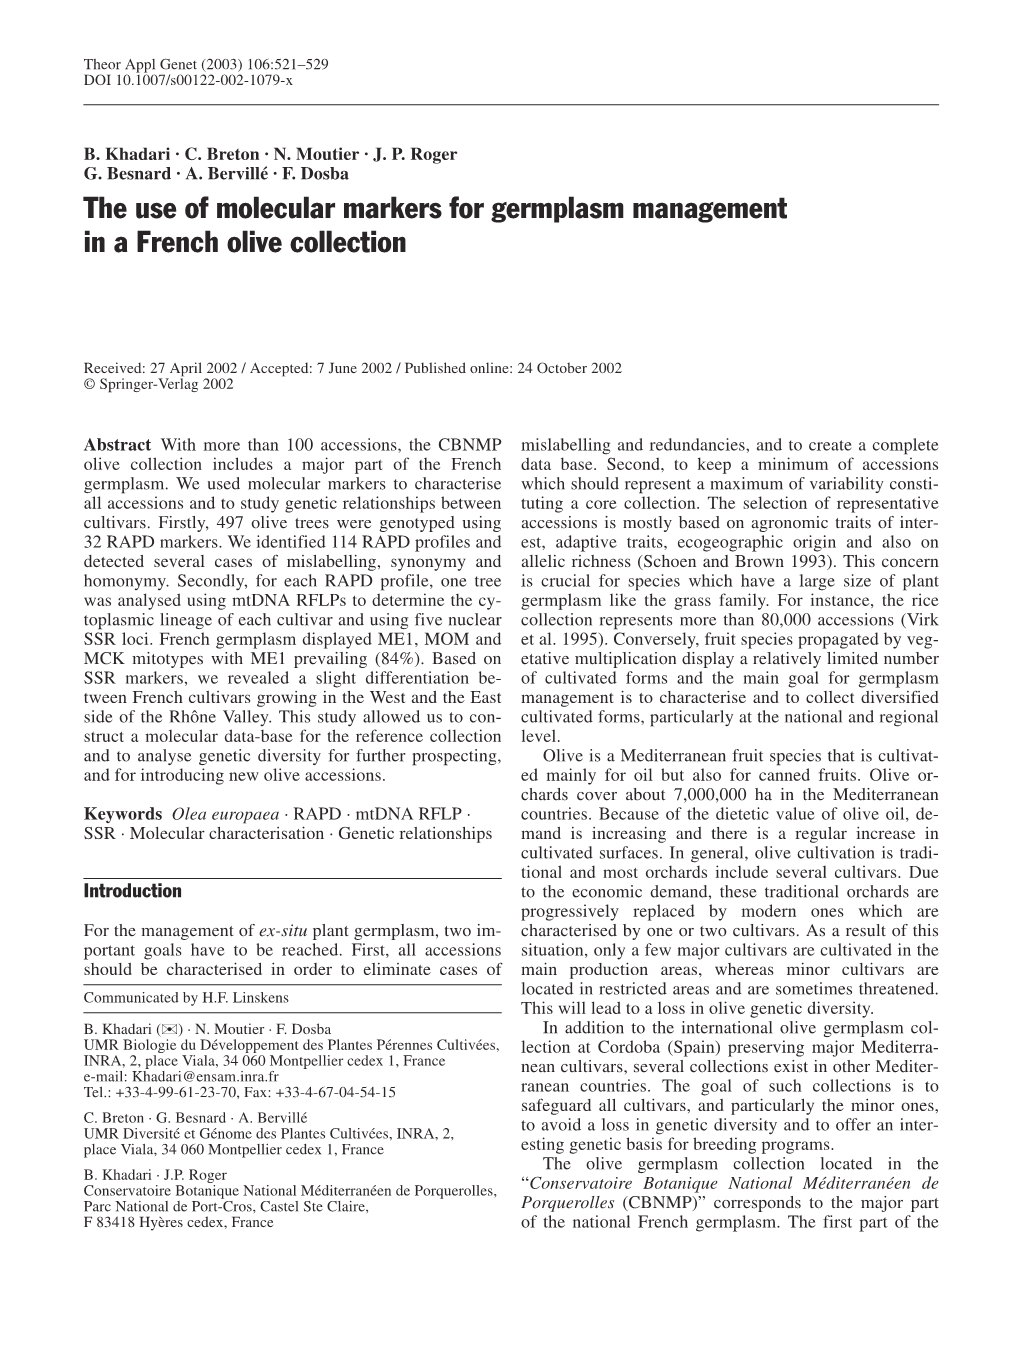 The Use of Molecular Markers for Germplasm Management in a French Olive Collection